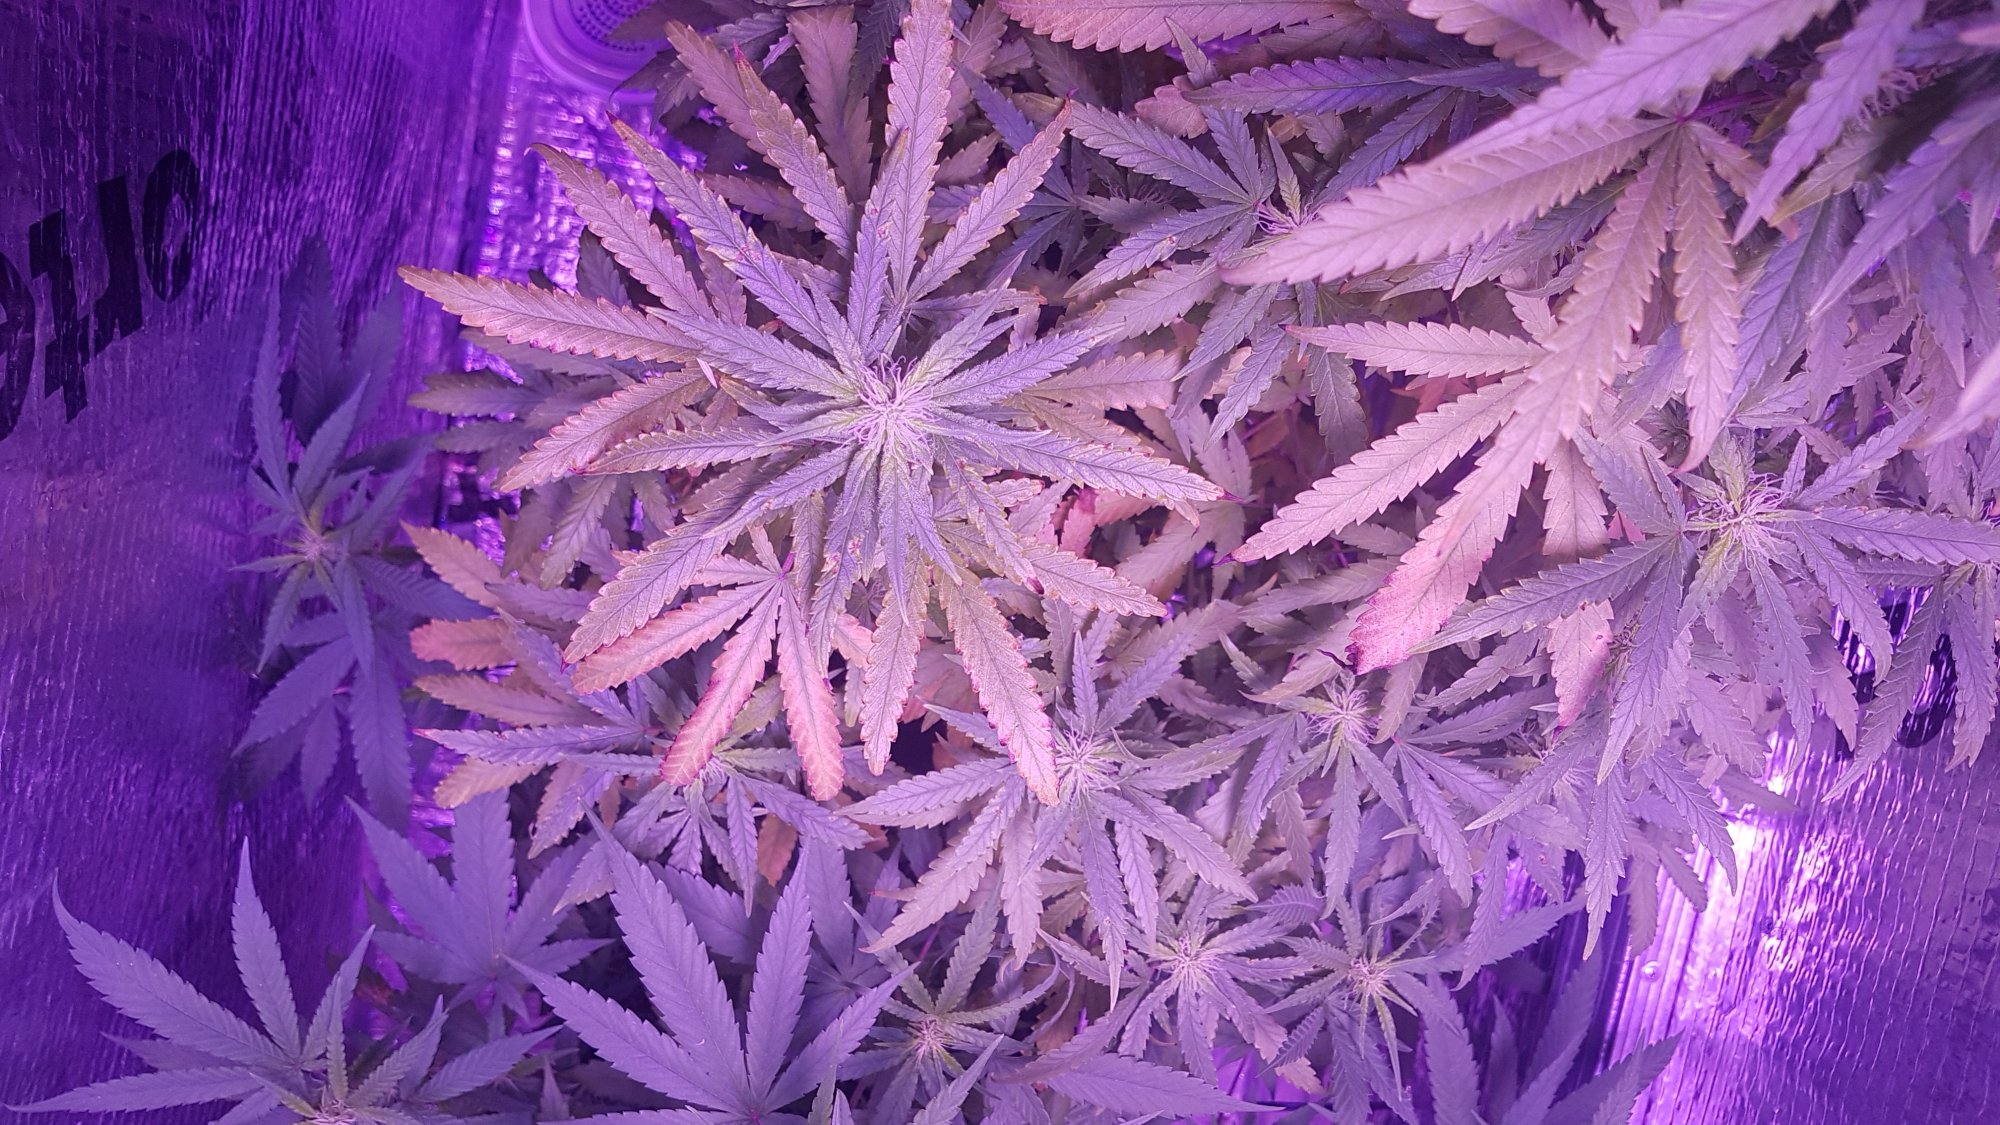 Any help would be great  5 week of flowering